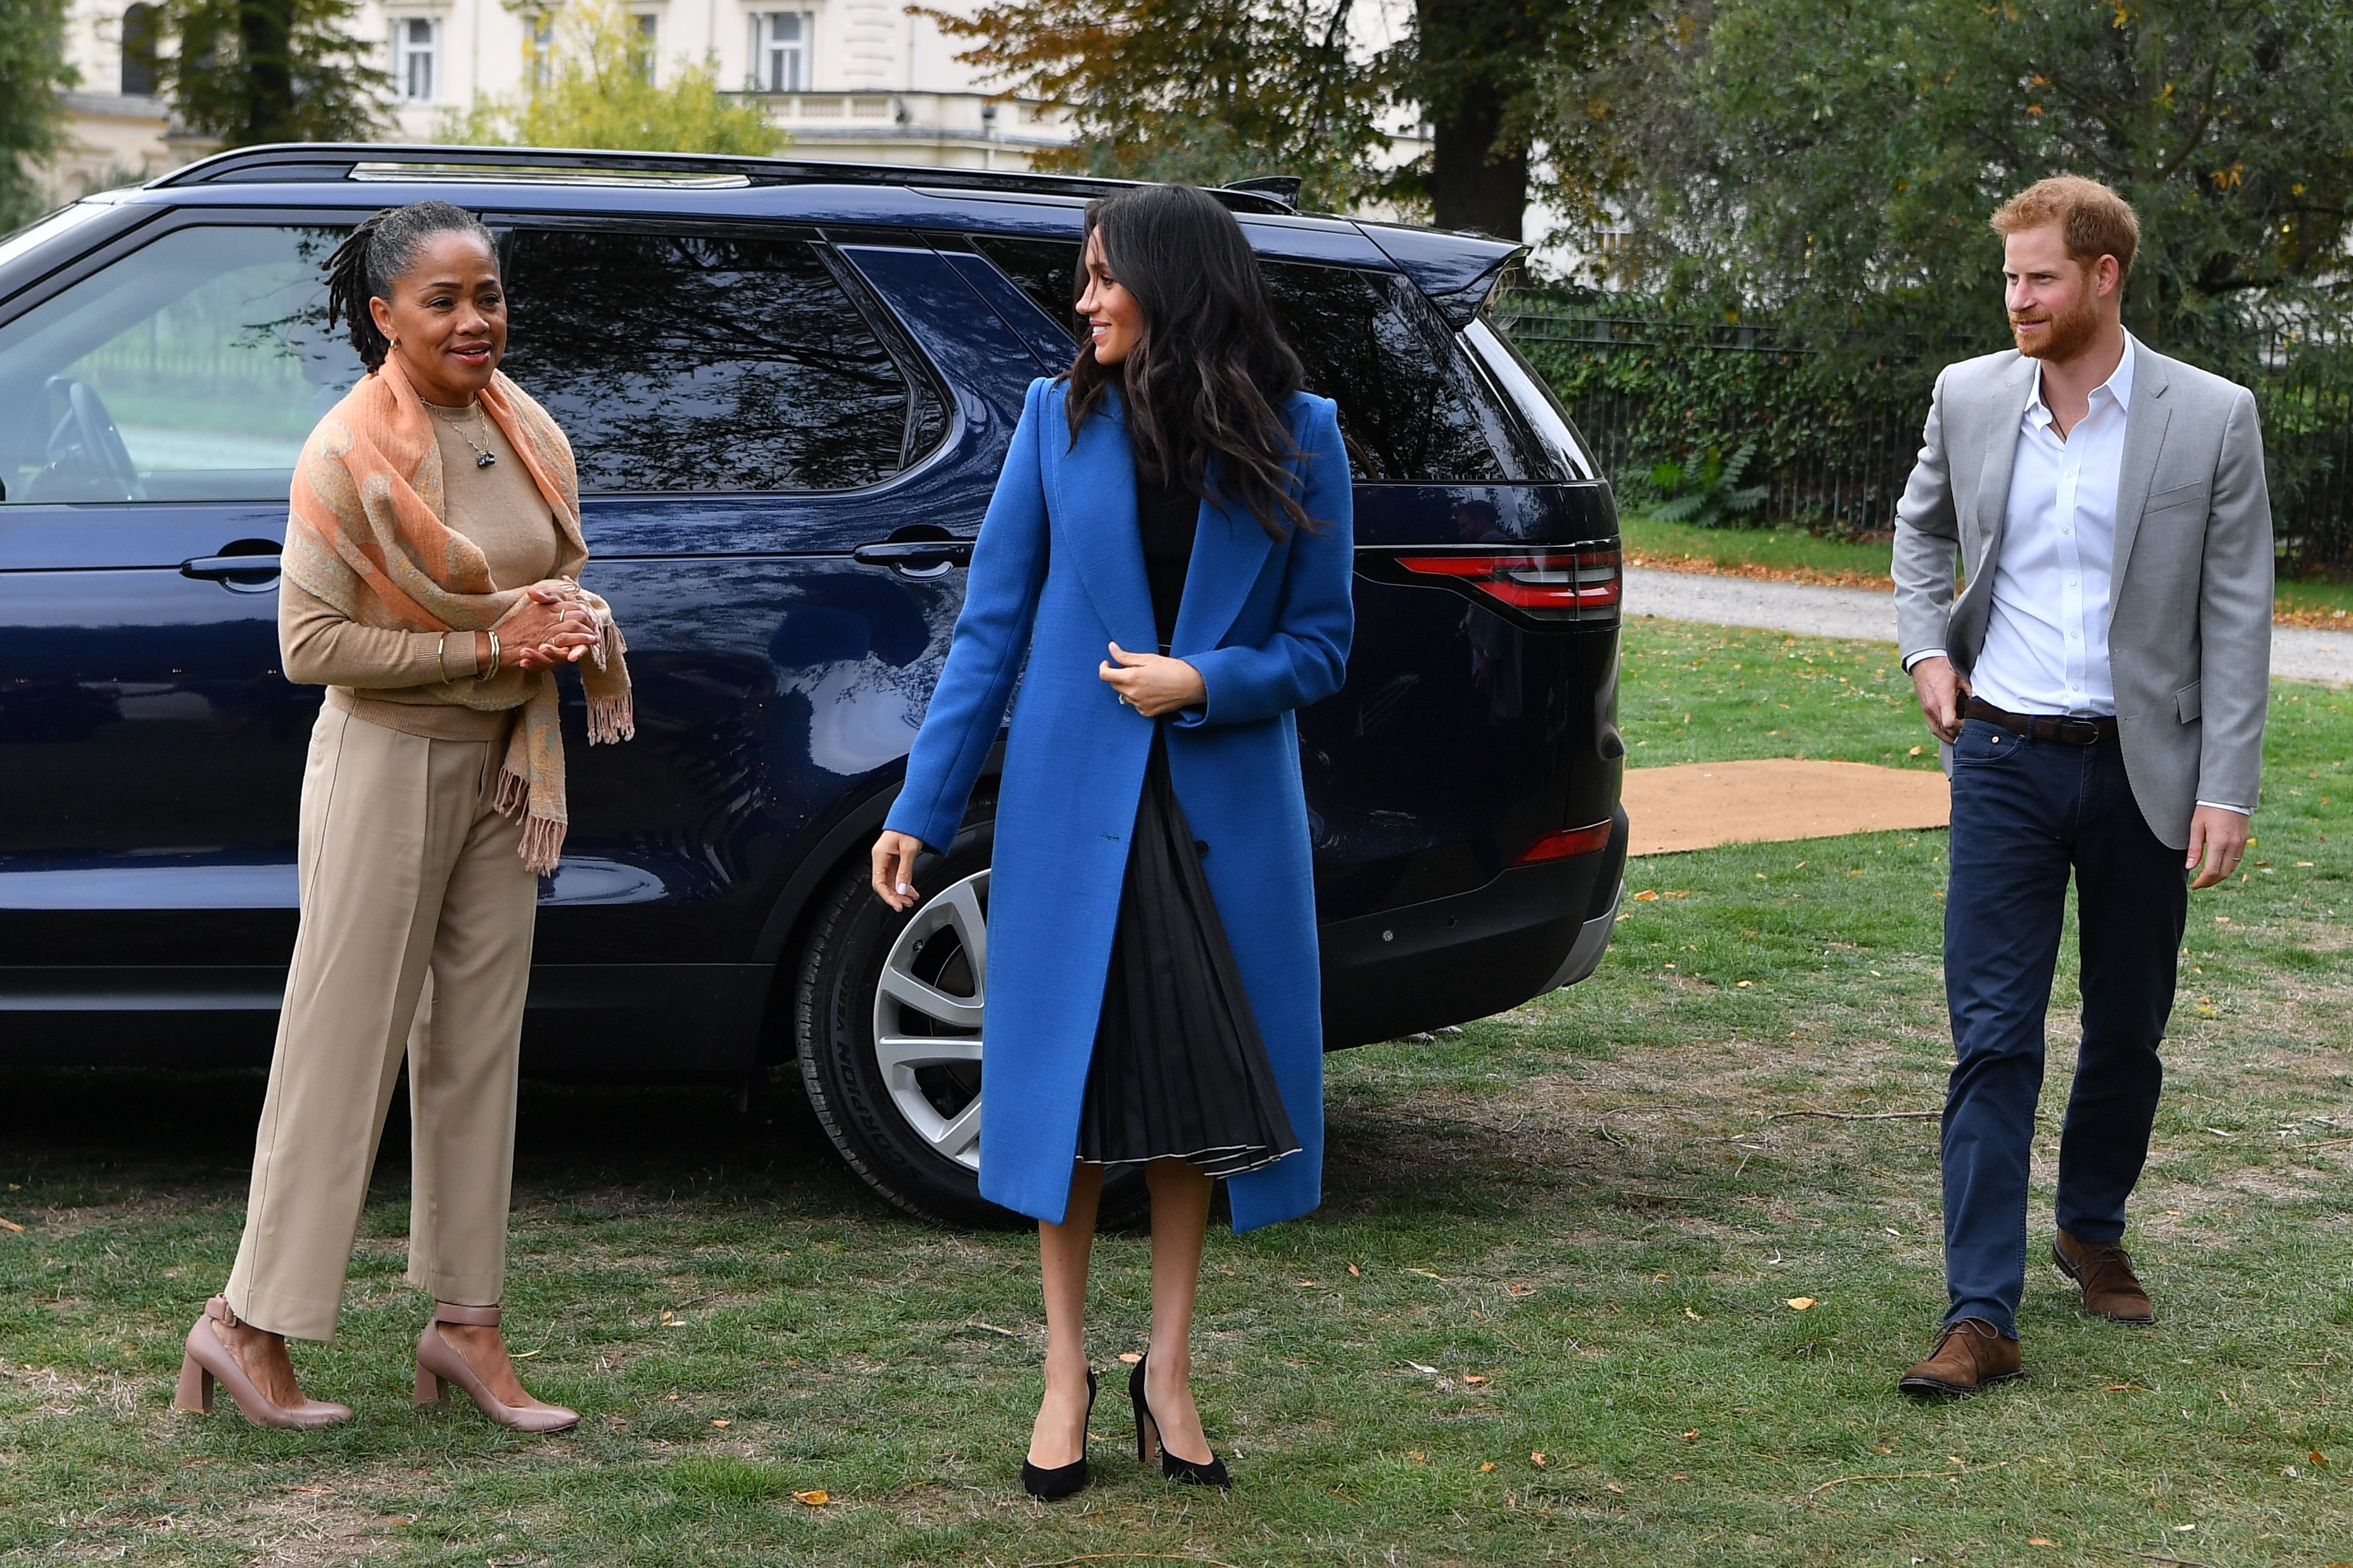 Doria Ragland with Meghan Markle and Prince Harry arrive at a cookbook event in 2018 | Photo: Getty Images